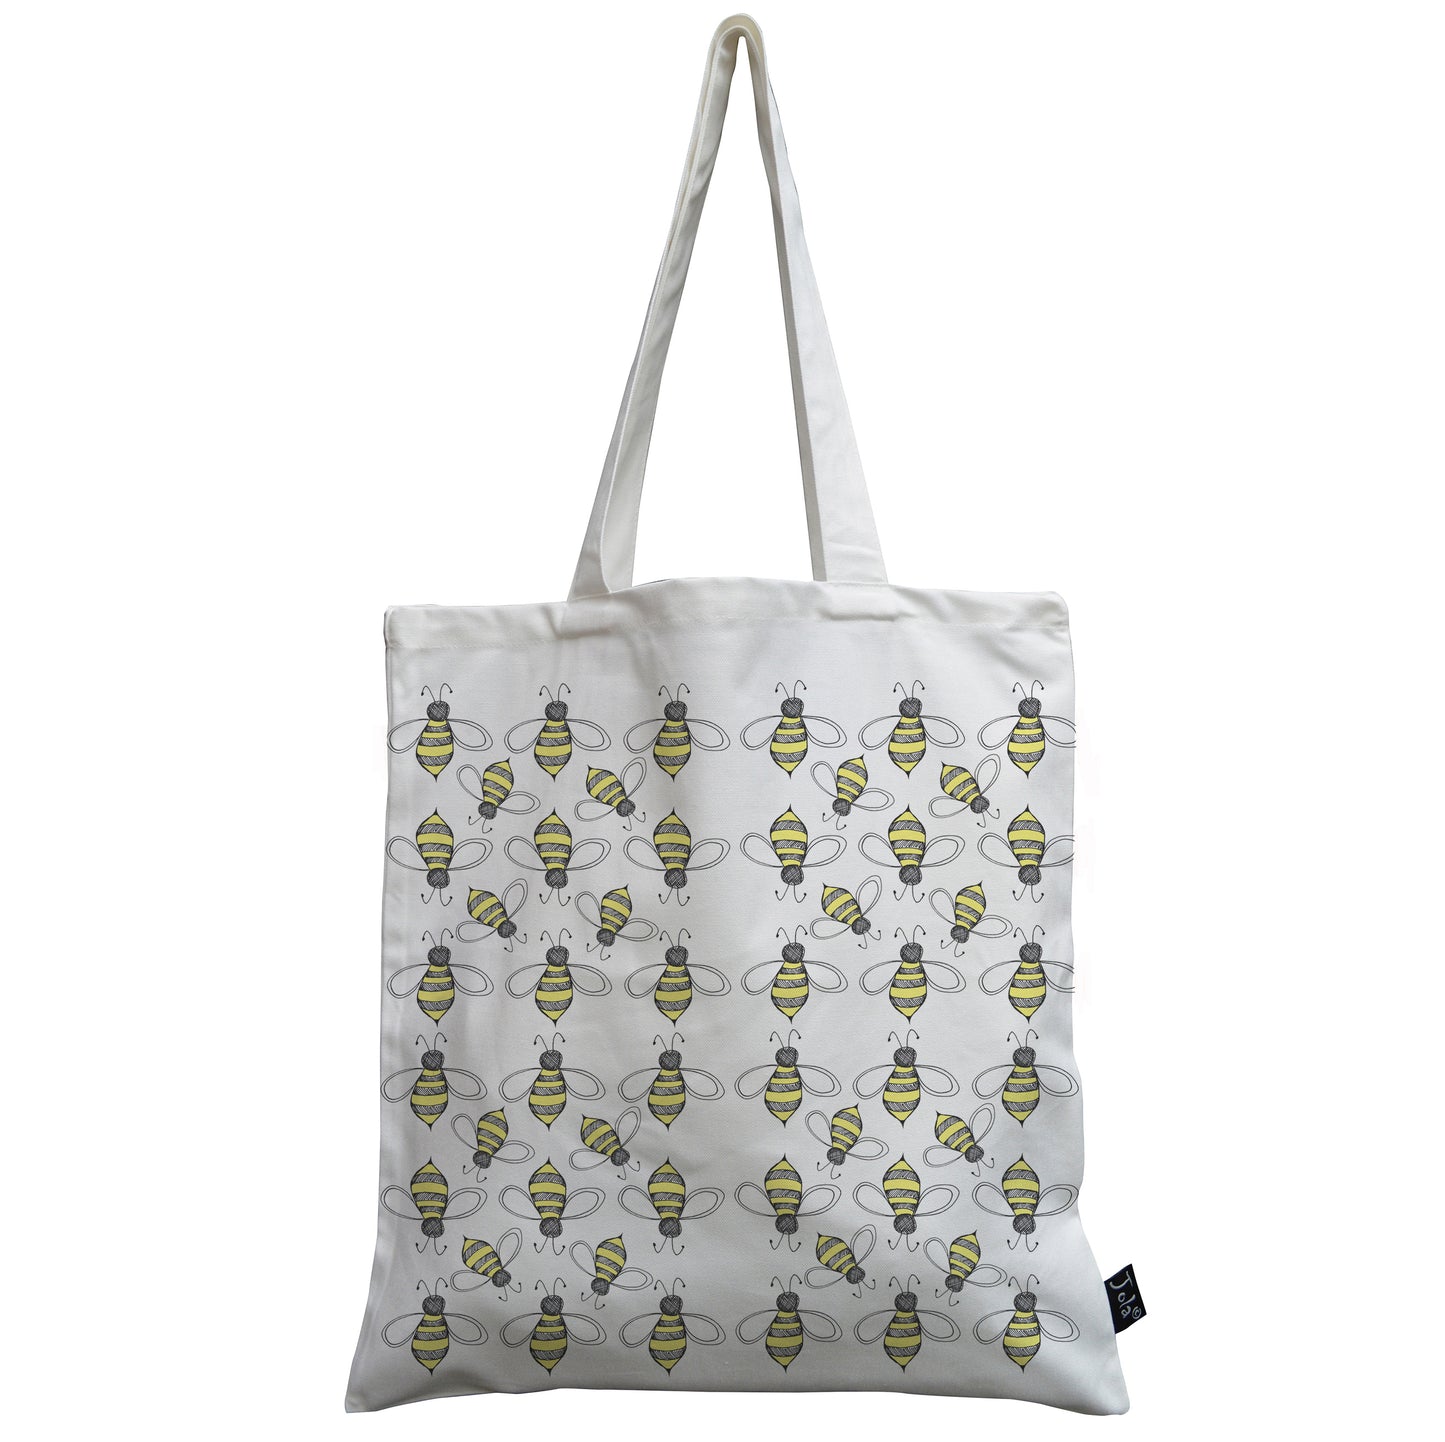 Lots of bees canvas bag